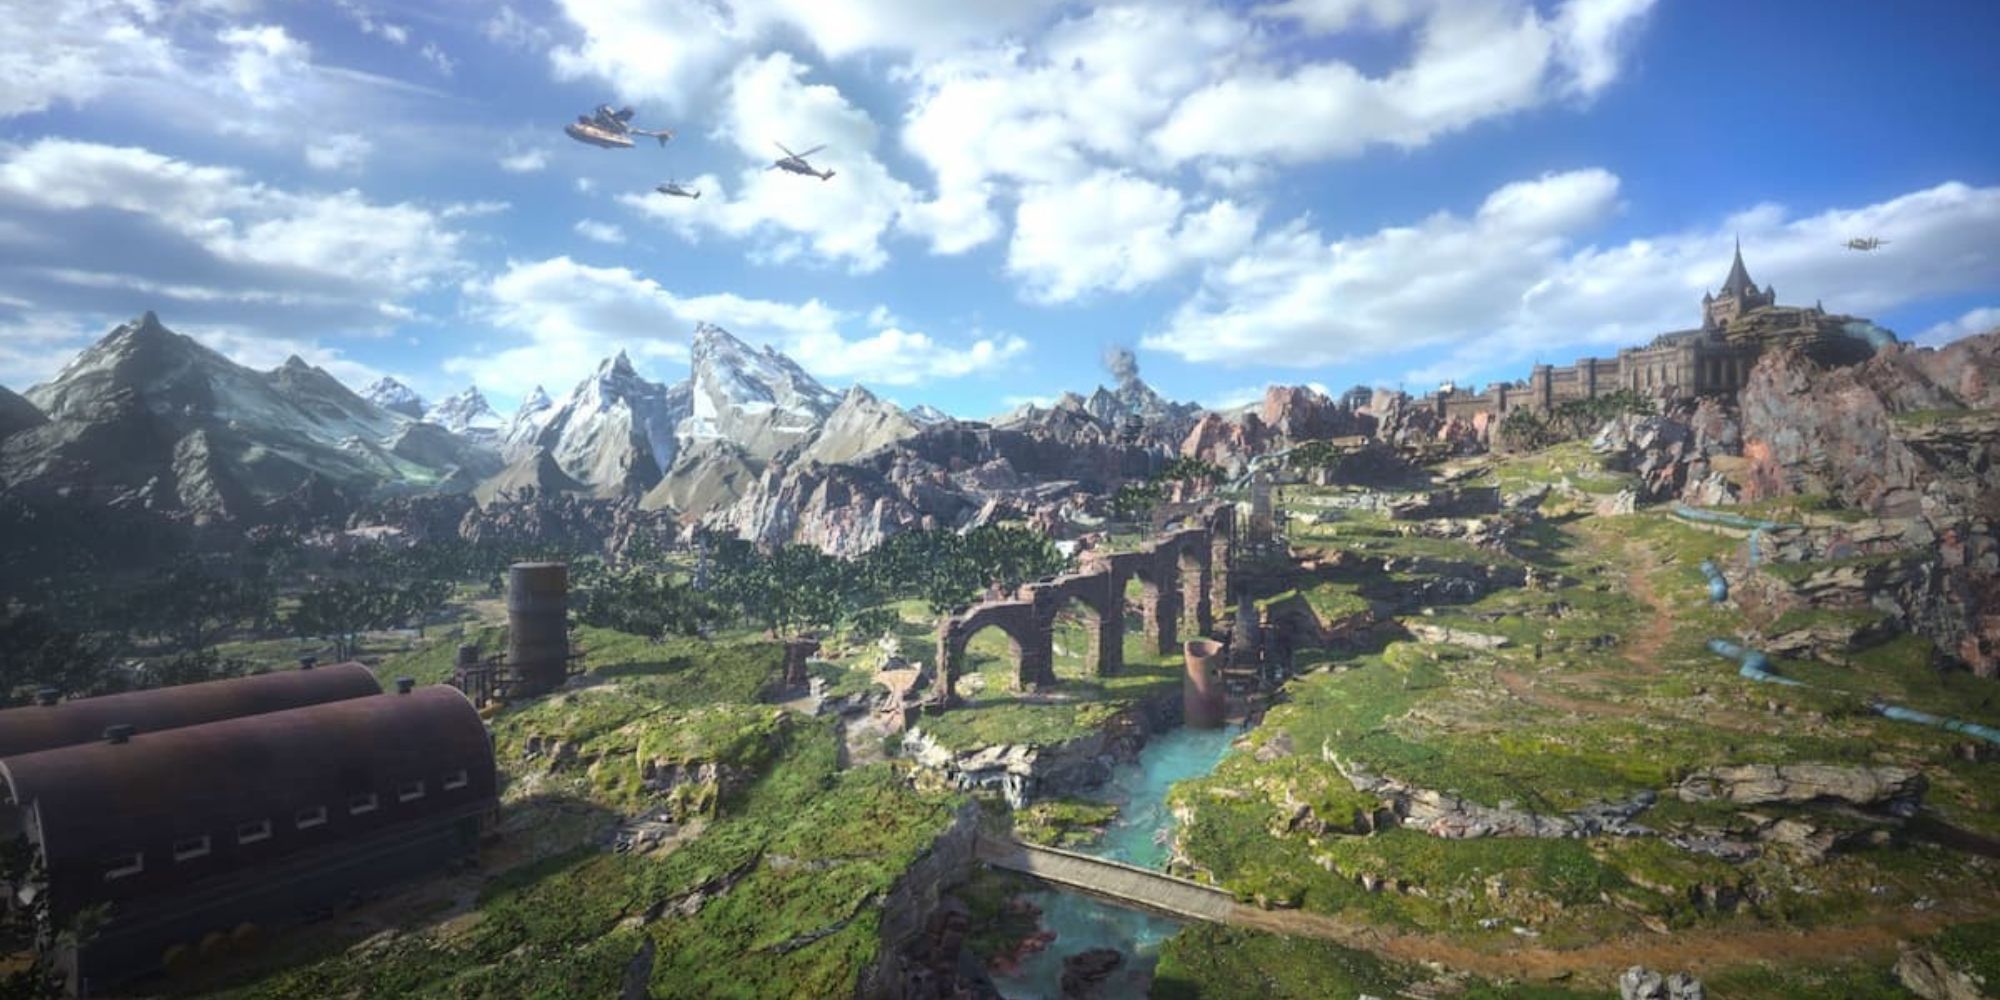 Still from Final Fantasy 7 Rebirth of The Grasslands region with grassy hills, mountains in the background and stone ruins.